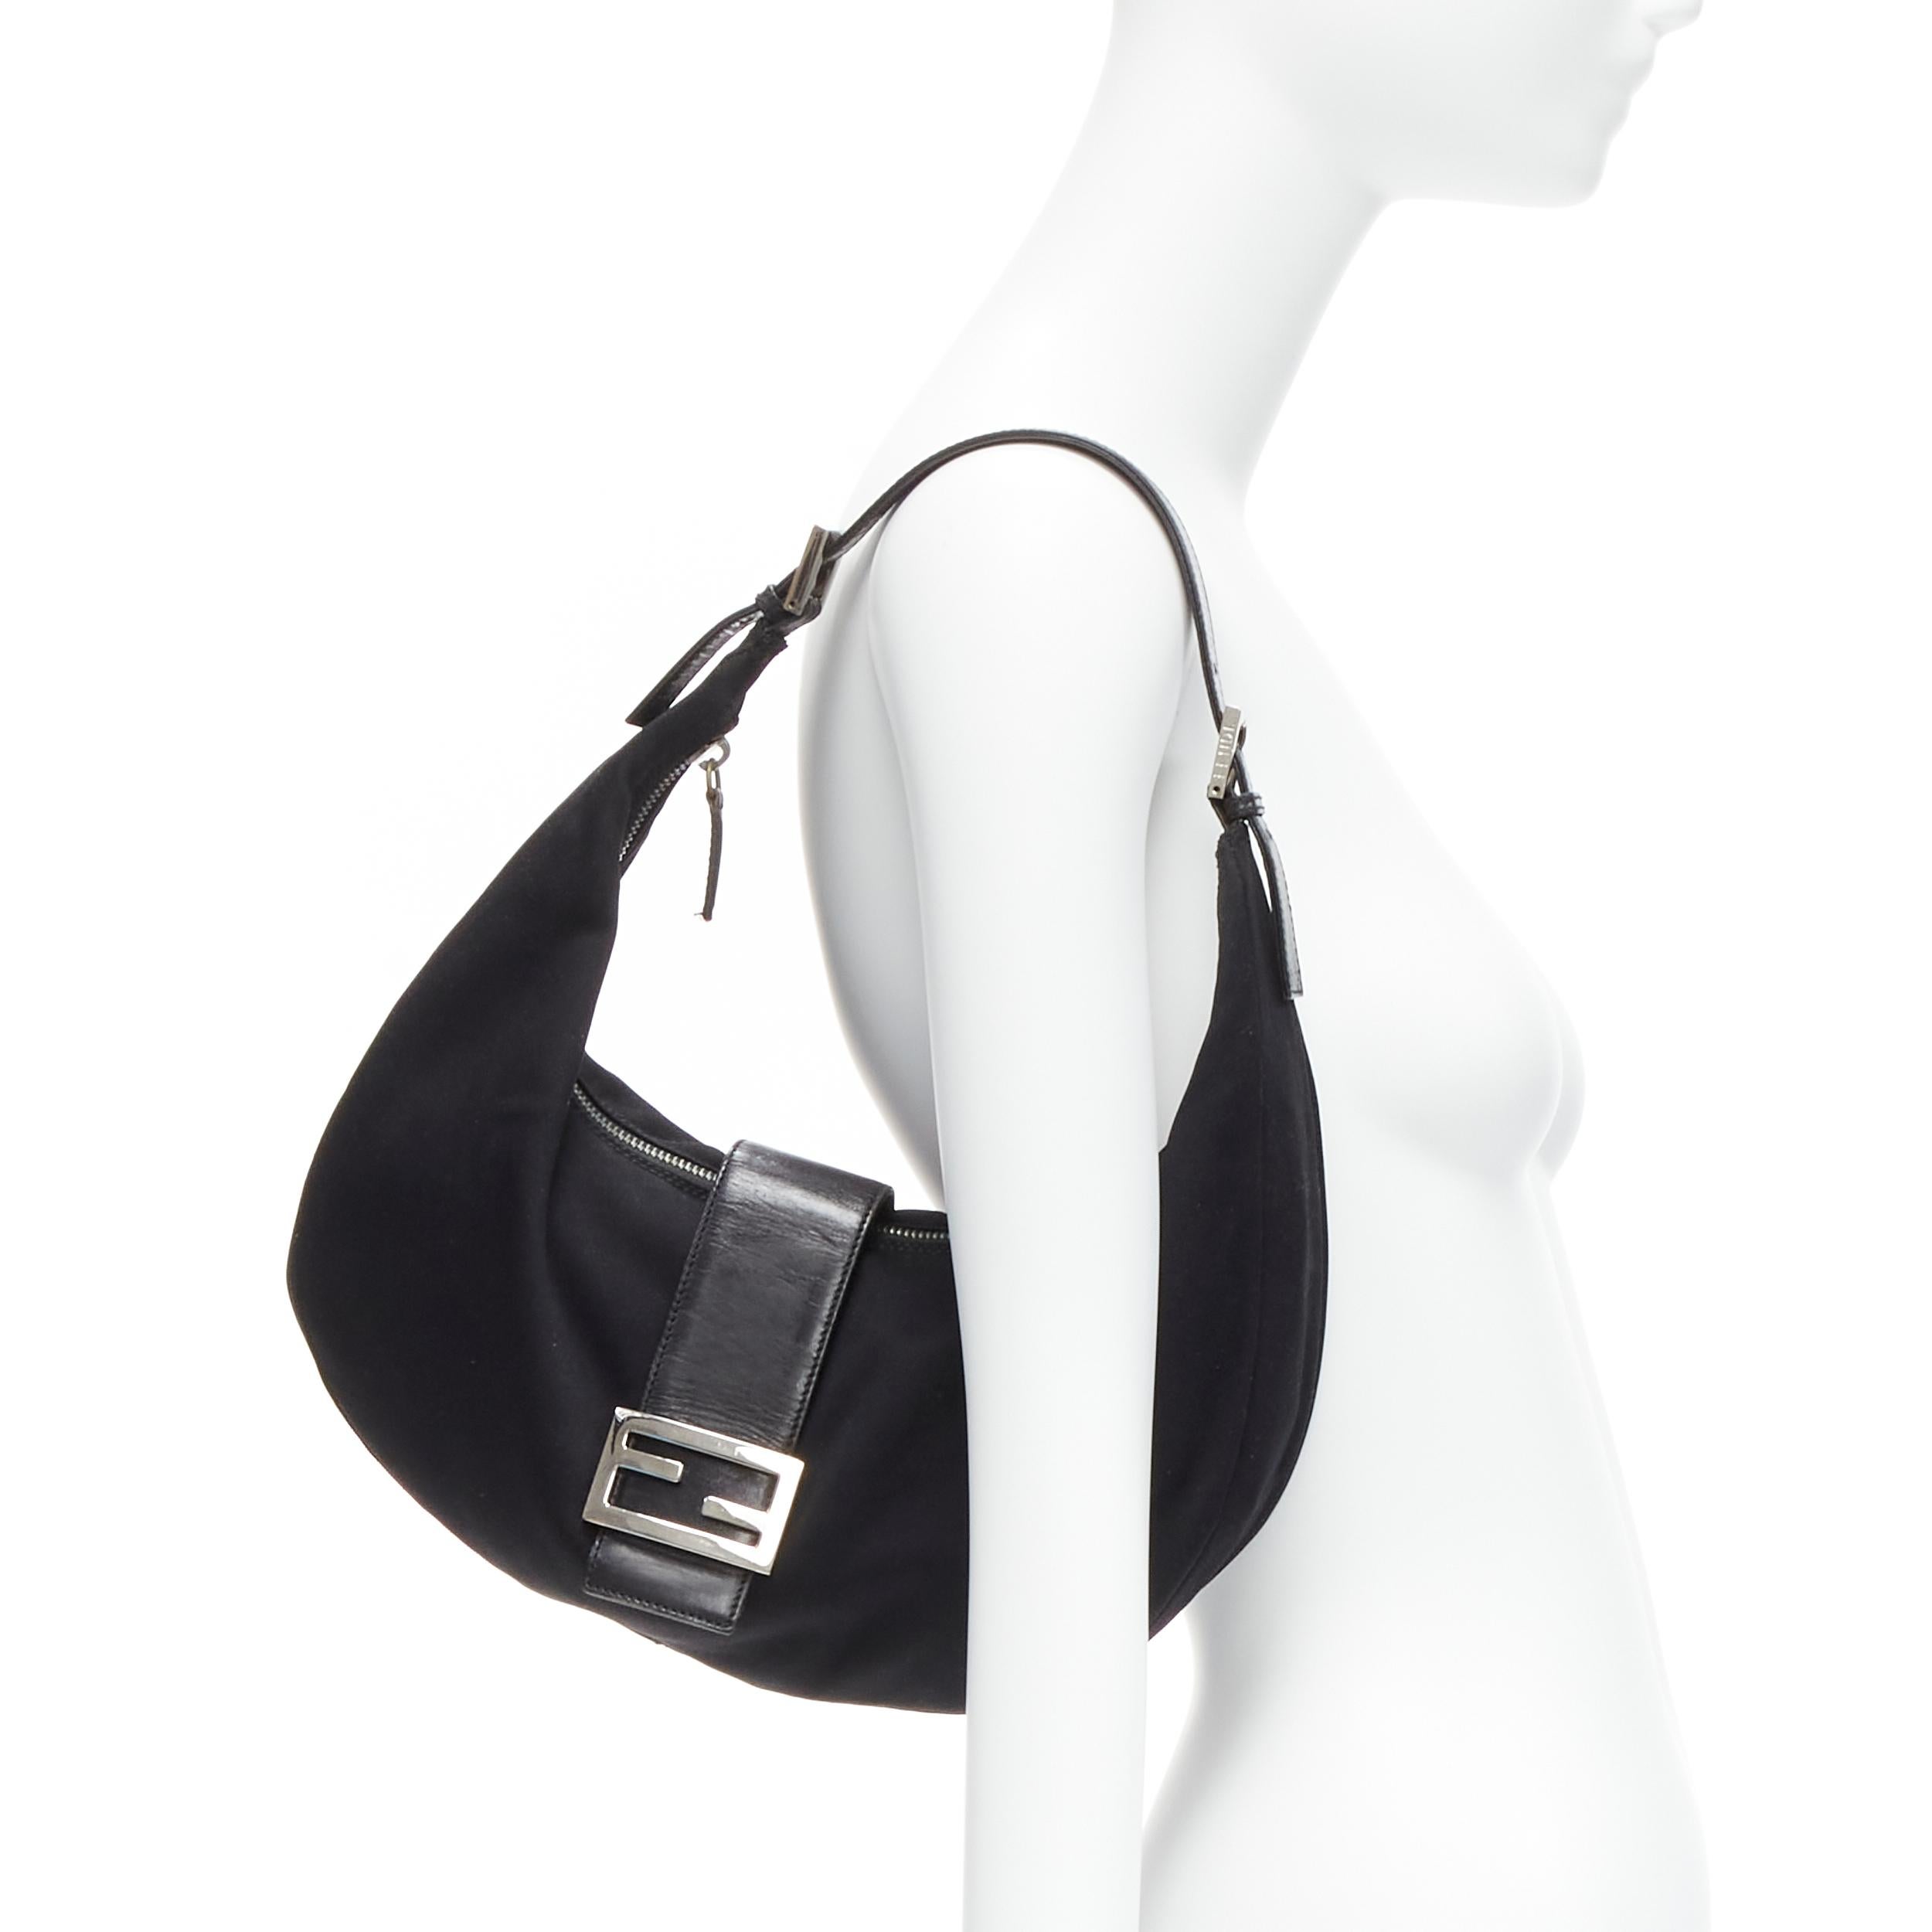 FENDI Vintage Croissant black jersey fabric silver FF logo buckle underarm bag
Reference: TGAS/D00224
Brand: Fendi
Model: Croissant
Material: Fabric, Leather
Color: Black, Silver
Pattern: Solid
Closure: Snap Buttons
Lining: Black Fabric
Extra